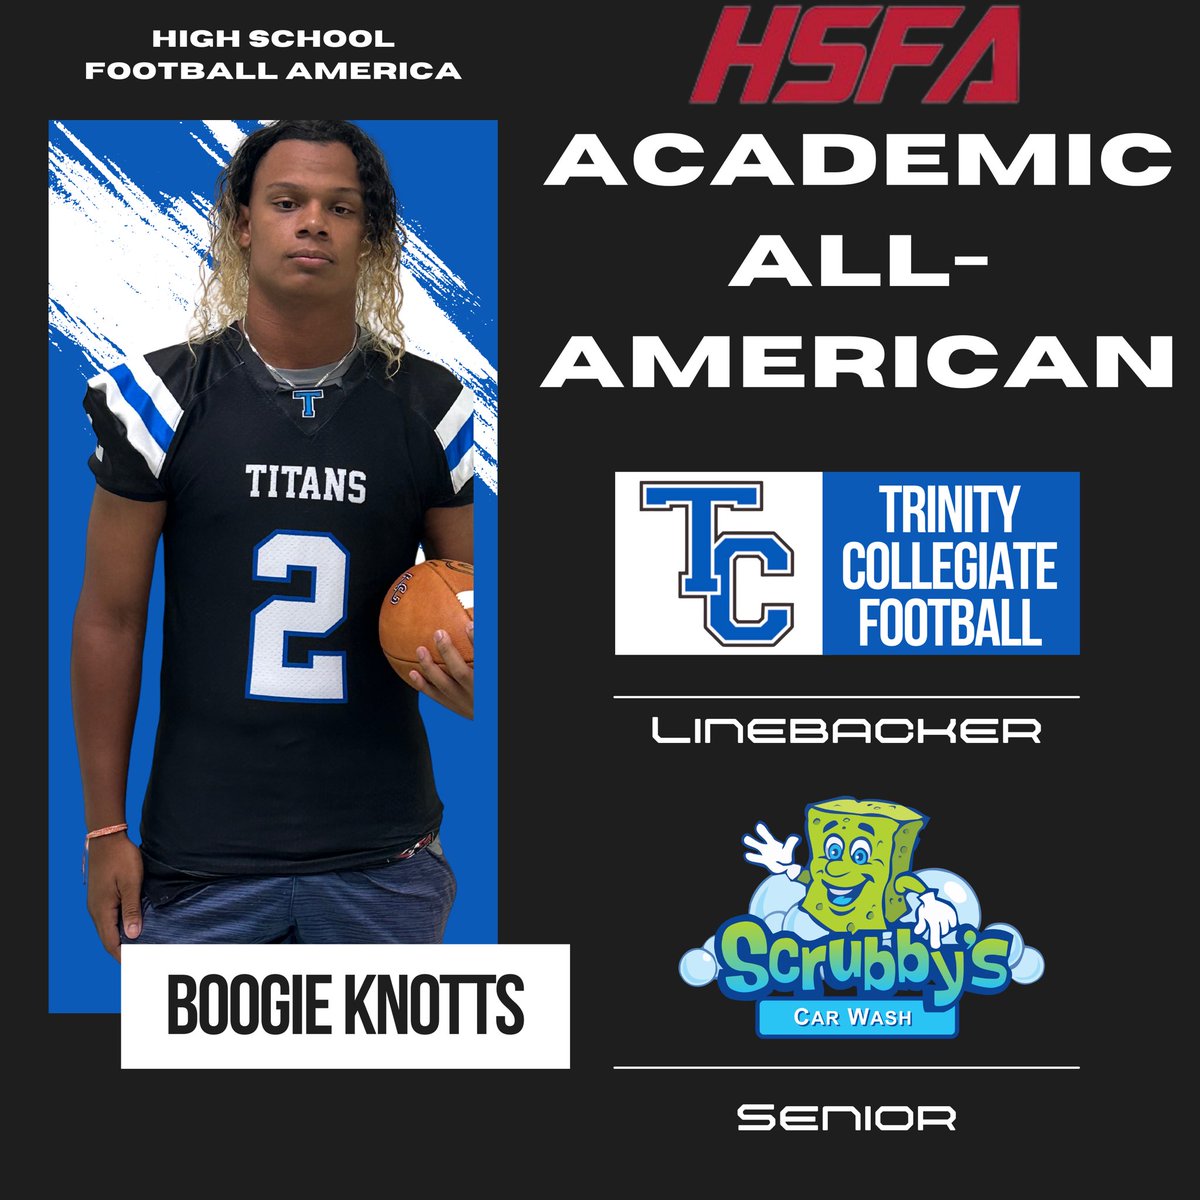 Senior linebacker and 2-sport athlete @BoogieKnotts is also a @HSFBamerica Academic All-American. Congrats to Boogie! #RecruitTCS